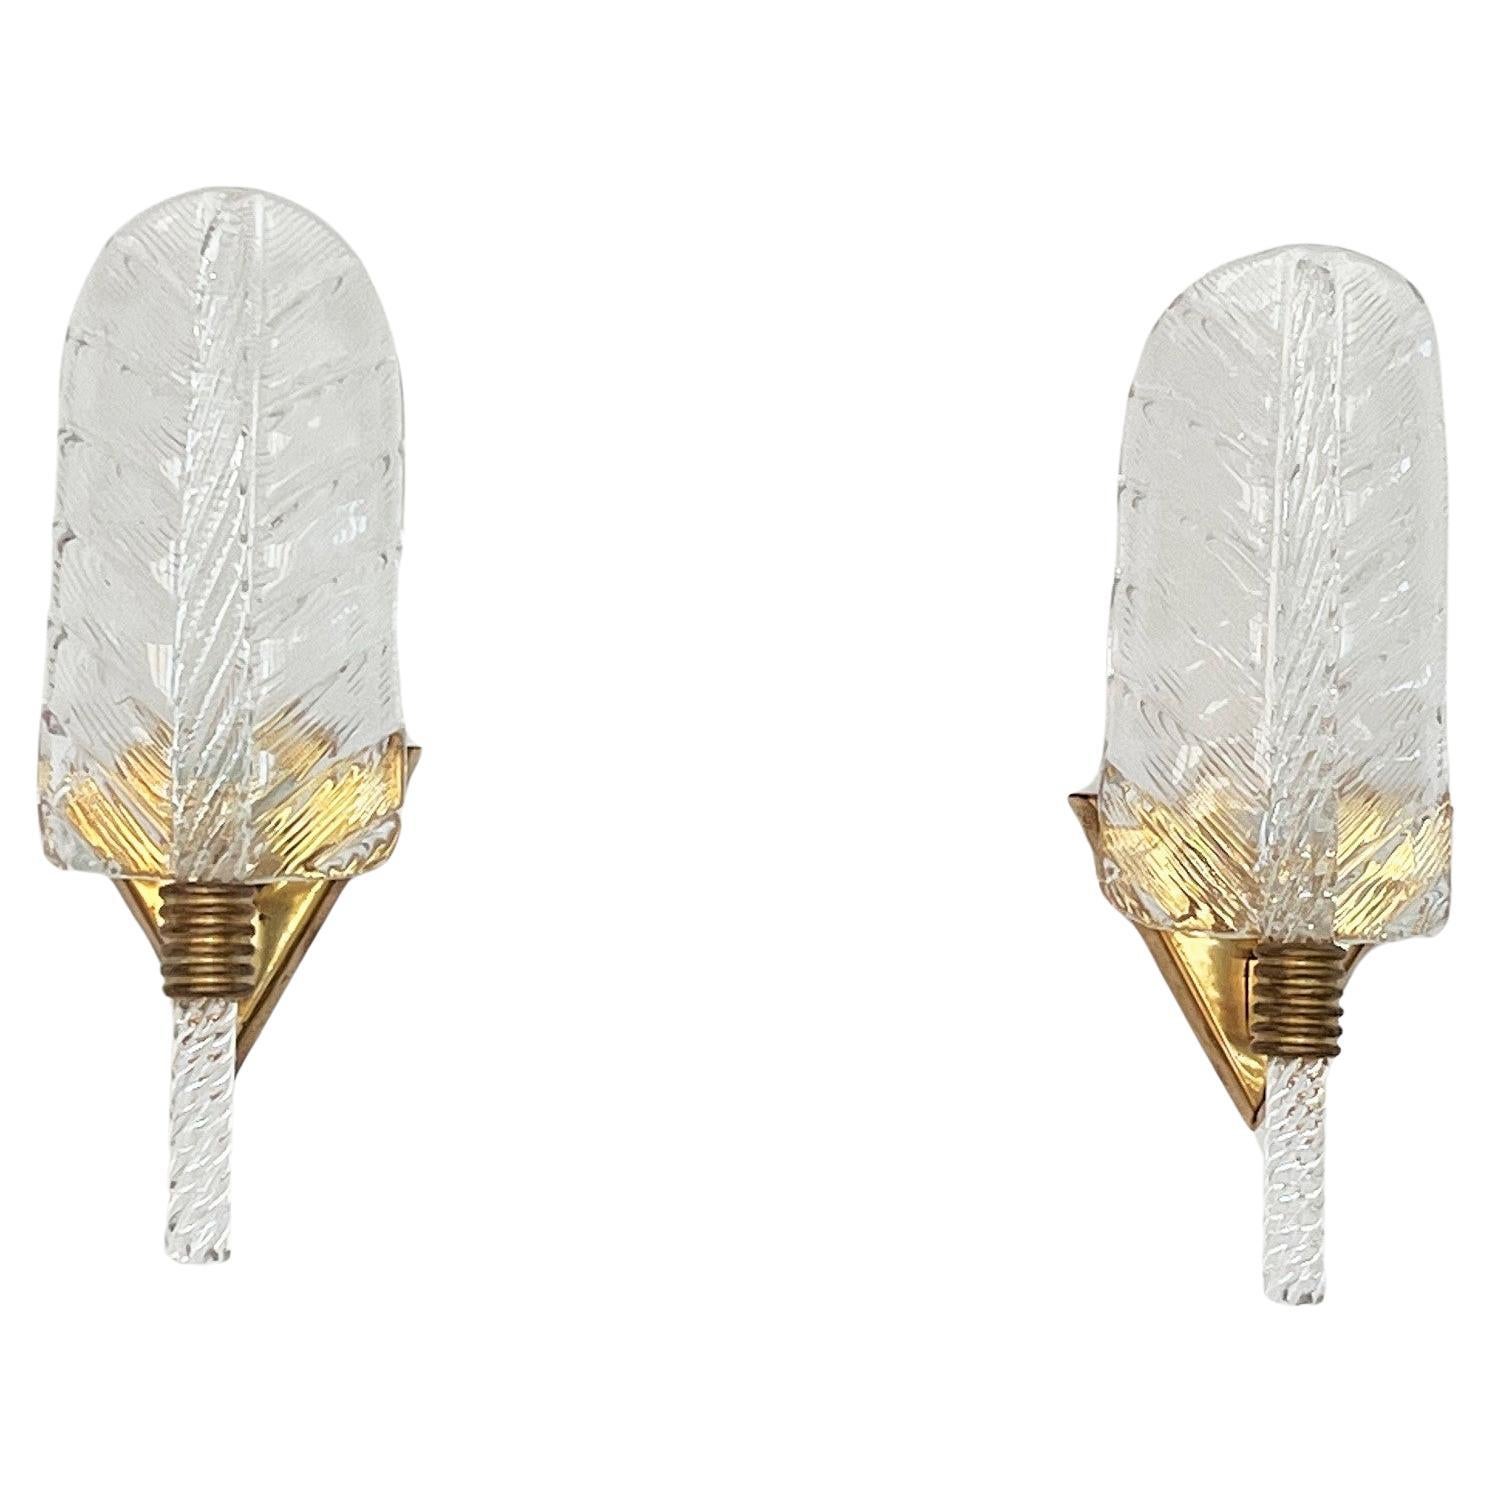 Italian Brass and Murano Glass Leaves Wall Lights in Barovier Toso Style, 1990s For Sale